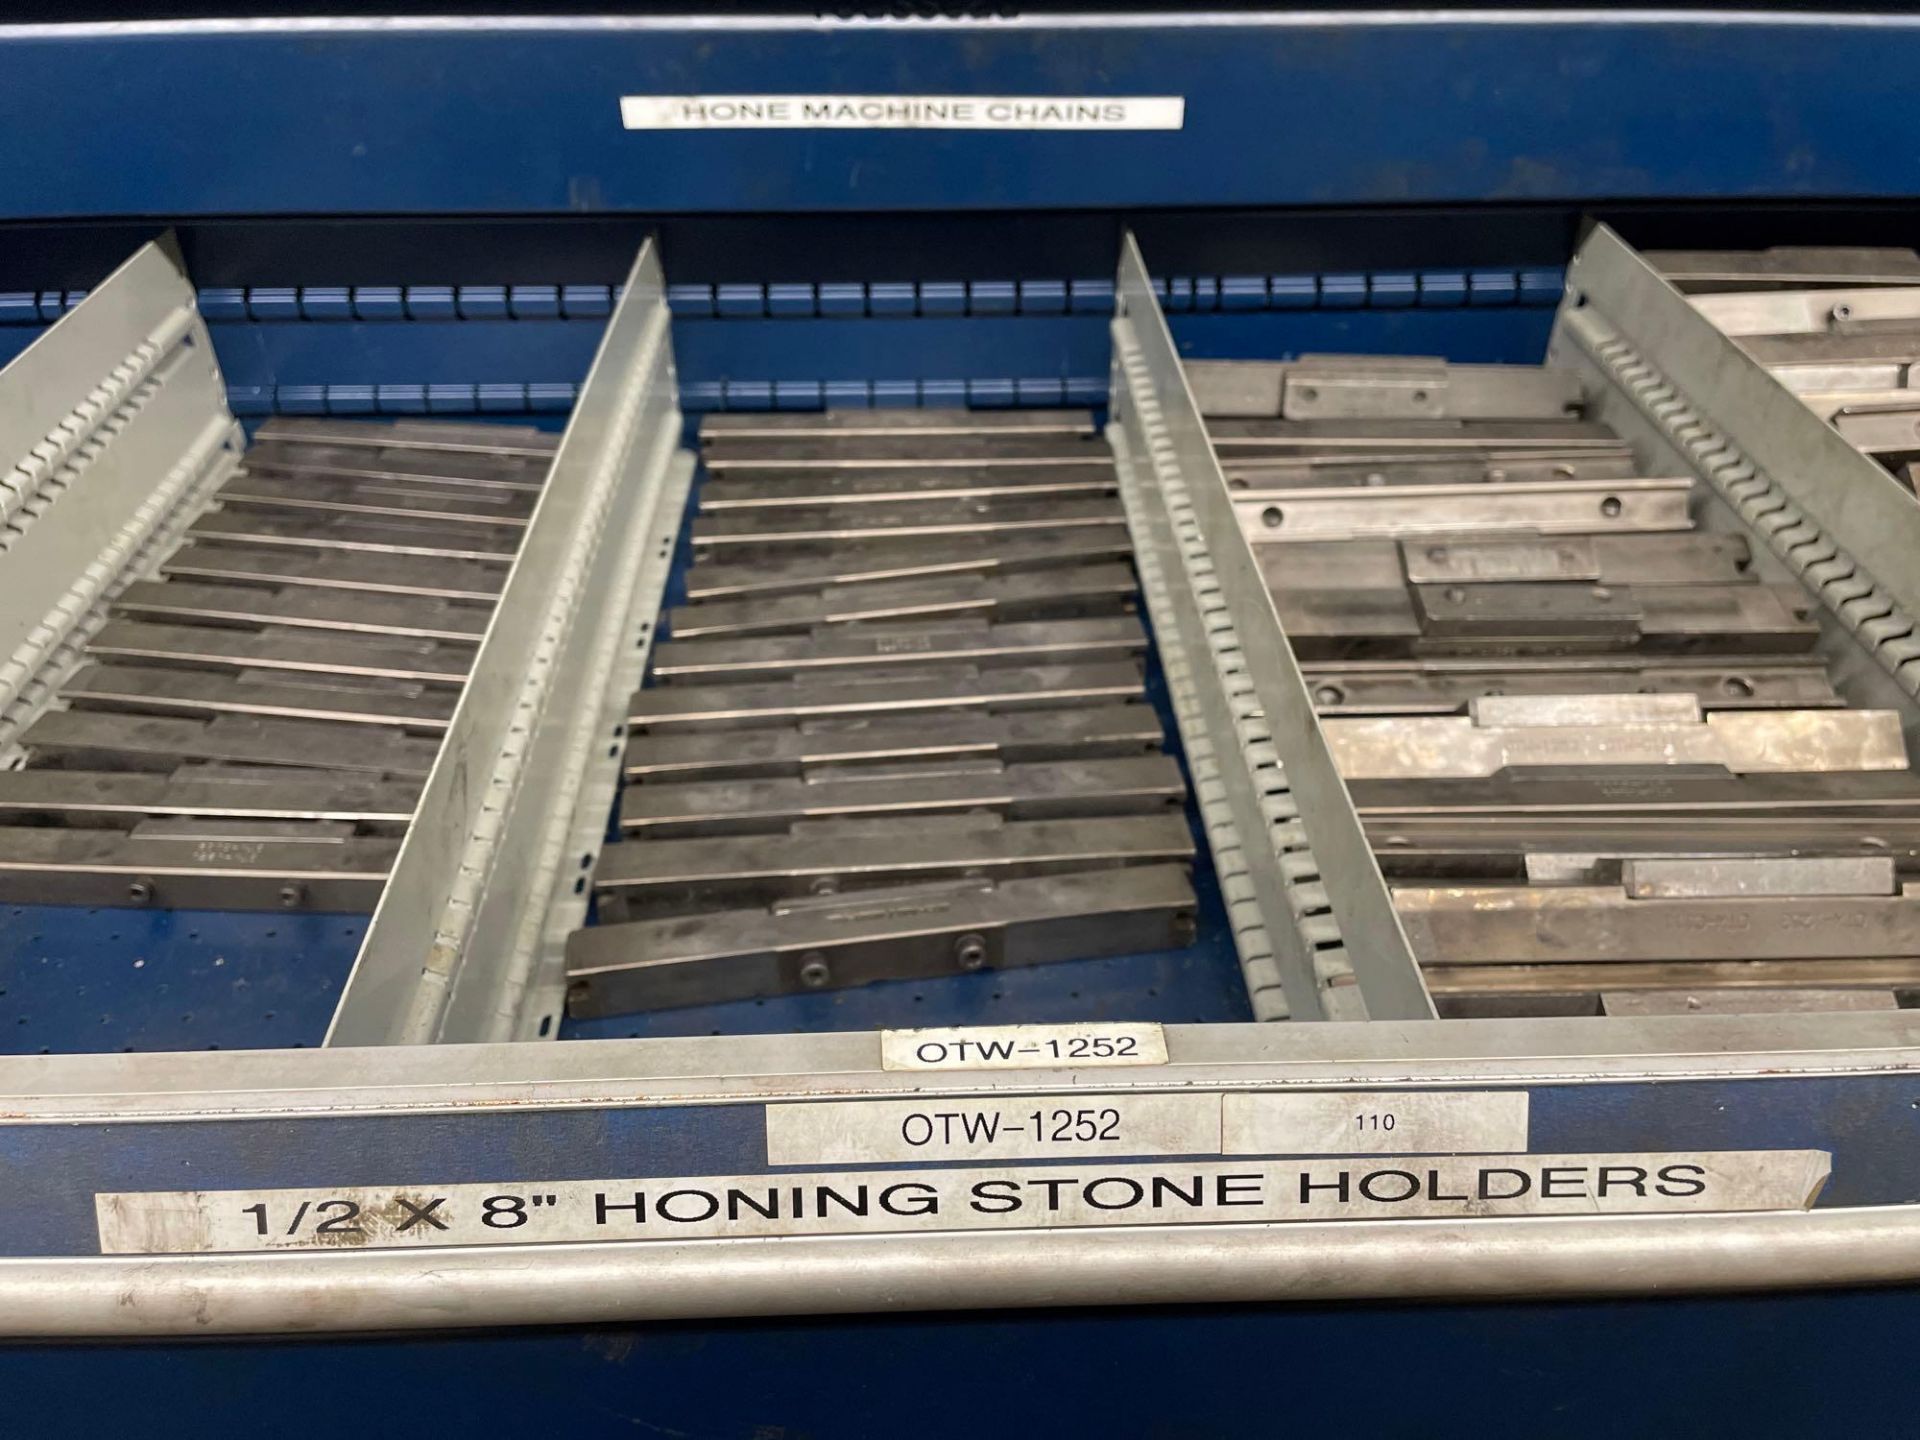 Honing Stone Holders 1/2" x 8" Cabinet A, Row 2: See Photo - Image 4 of 5